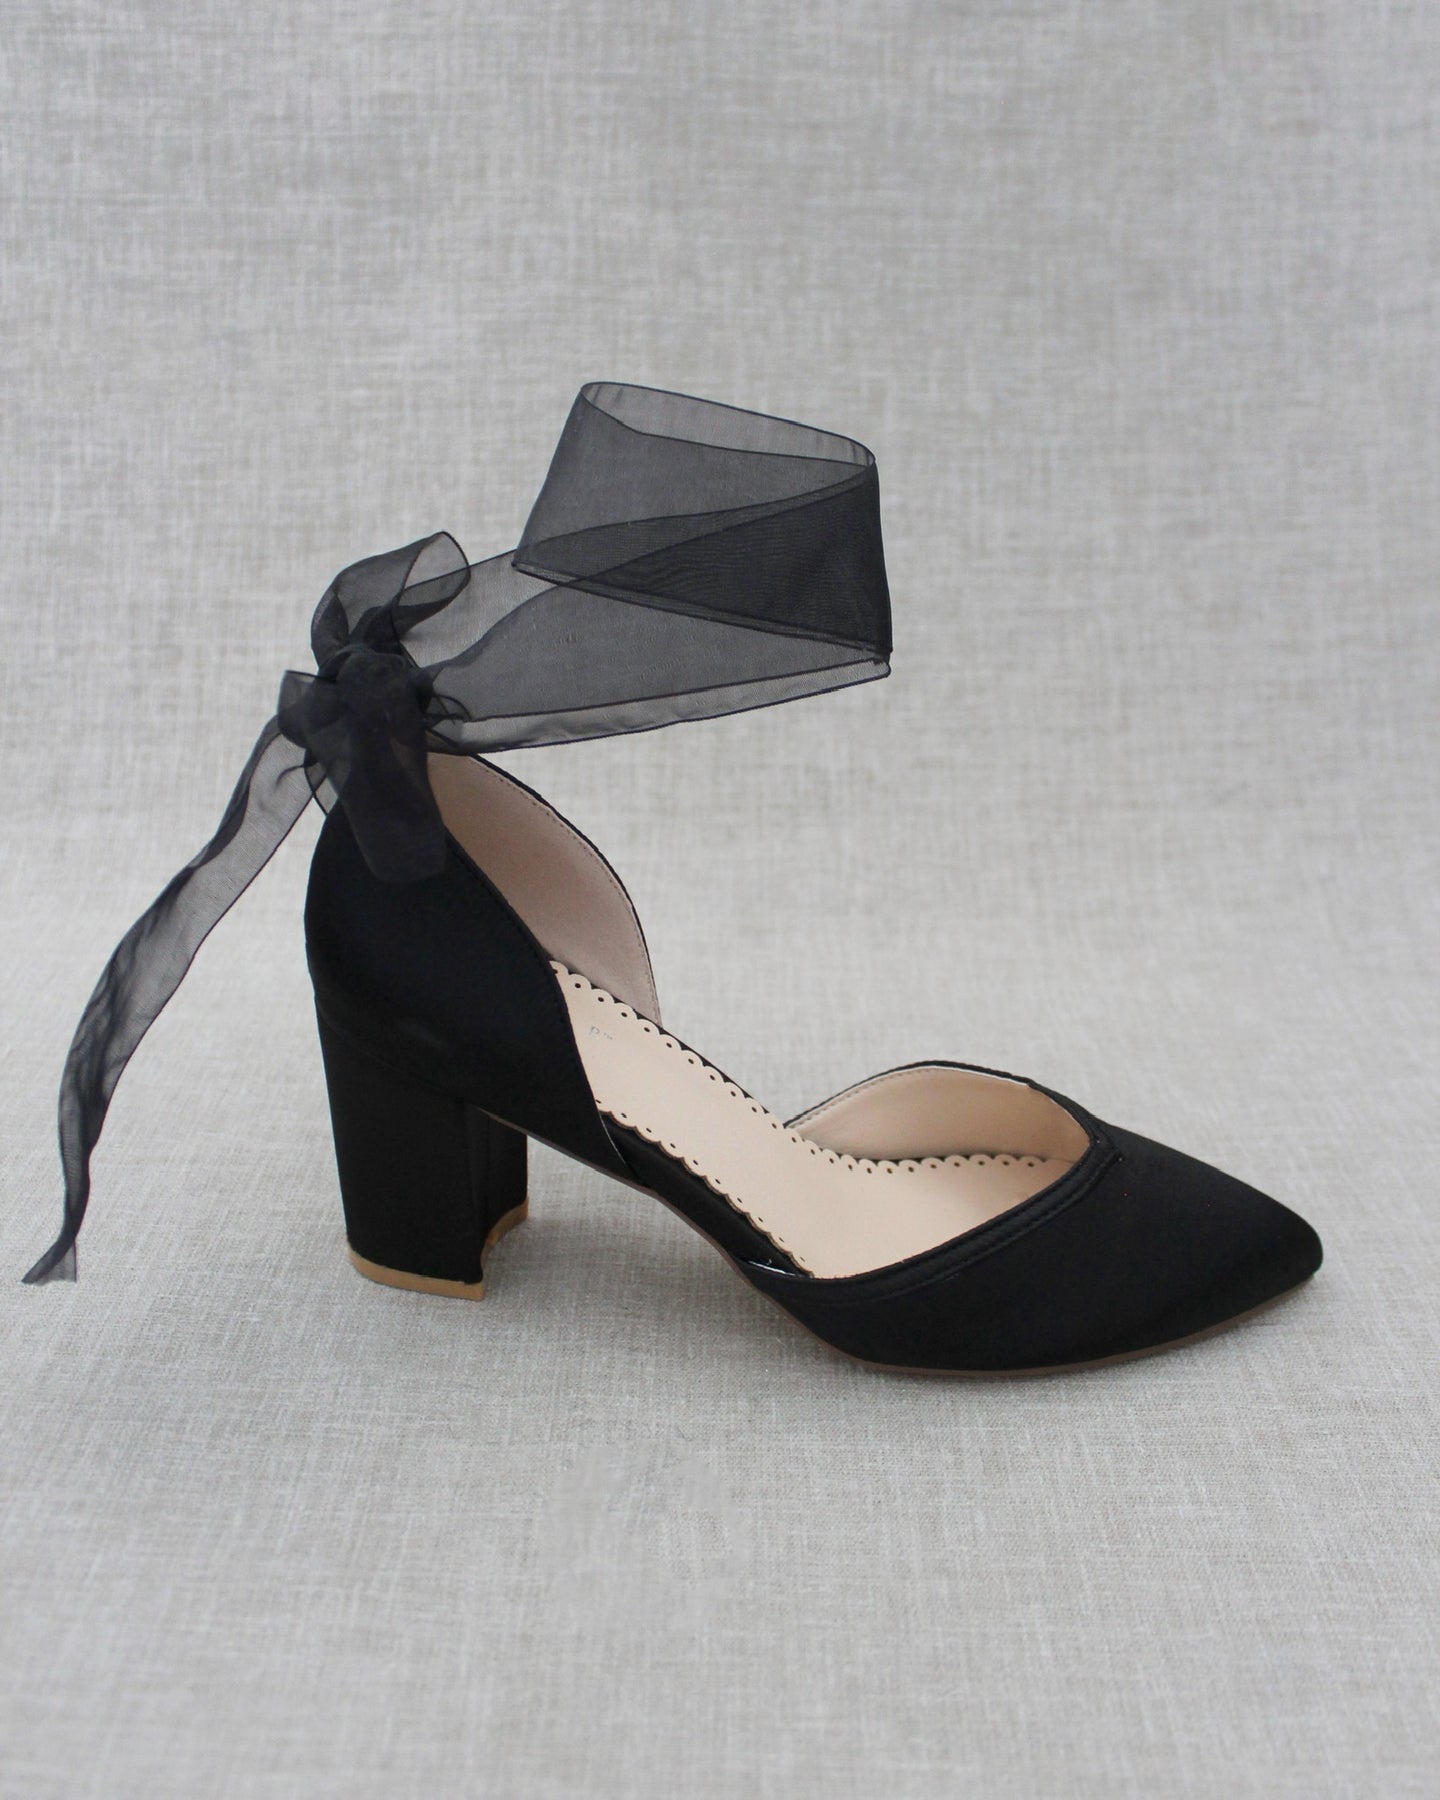 Women Black Shoes, Formal Shoes for Wedding, Bridal Party, Prom Shoes ...